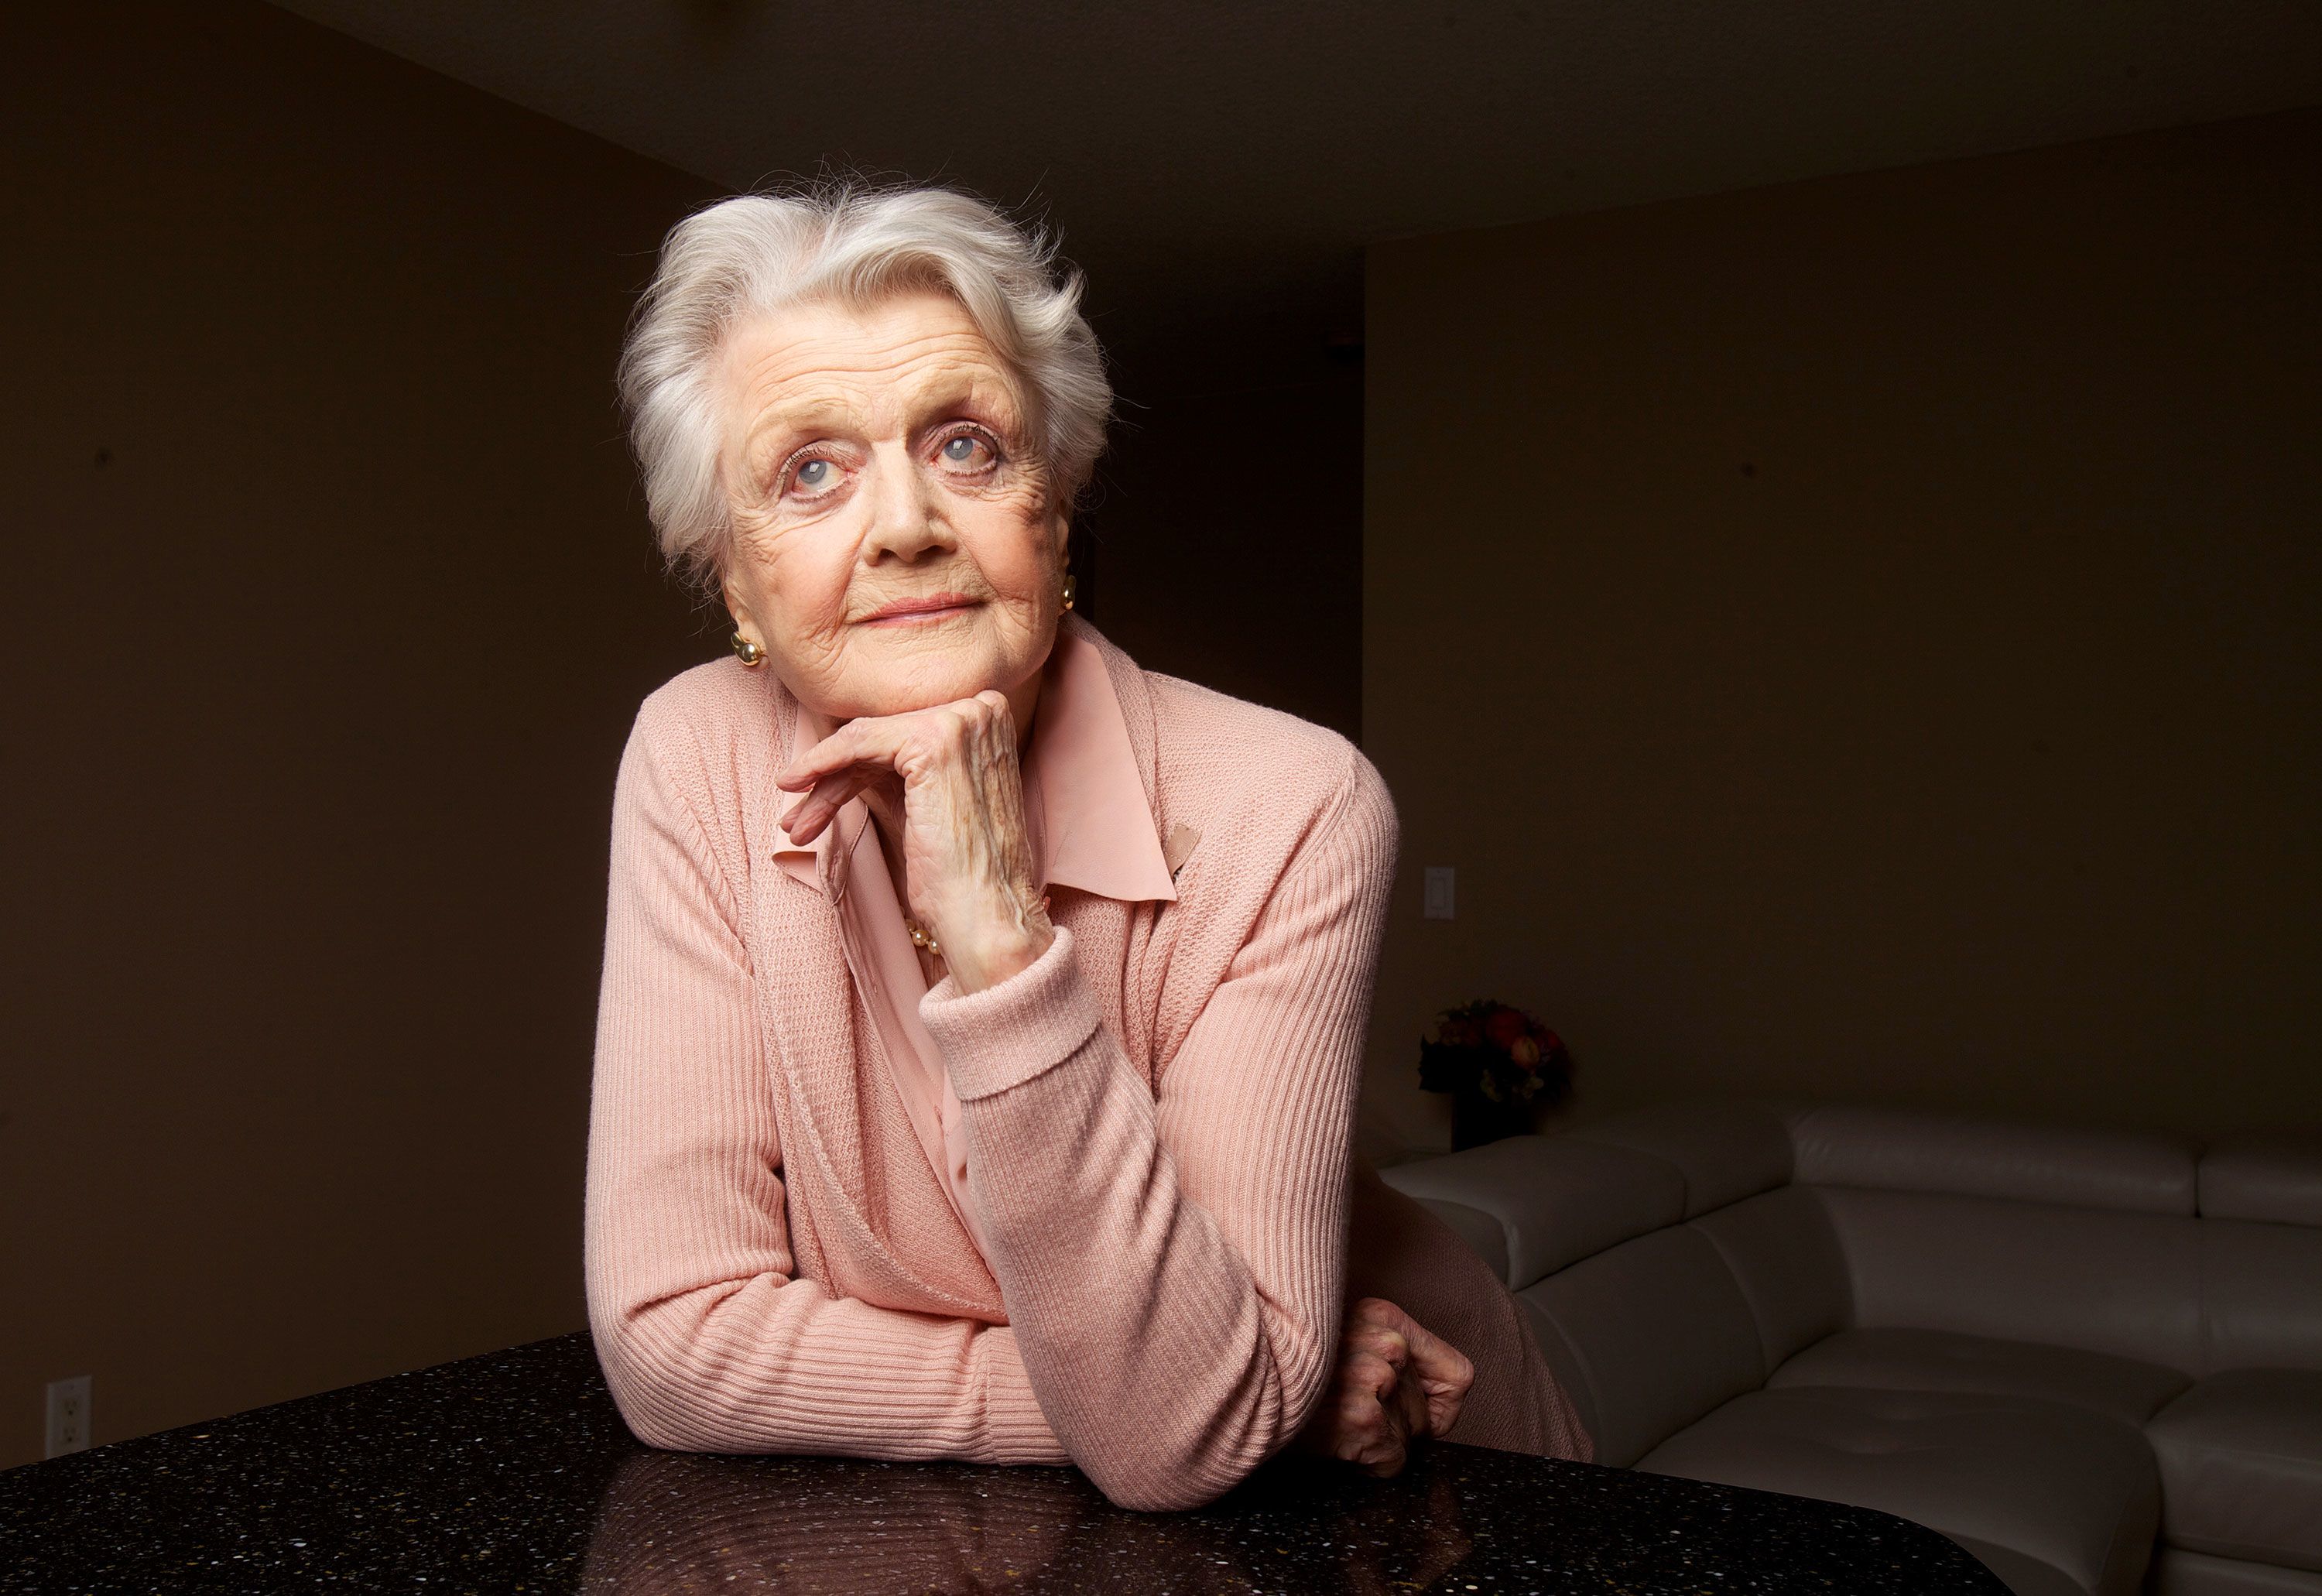 Broadway will dim its lights in tribute to 'Murder, She Wrote' star Angela Lansbury | CNN